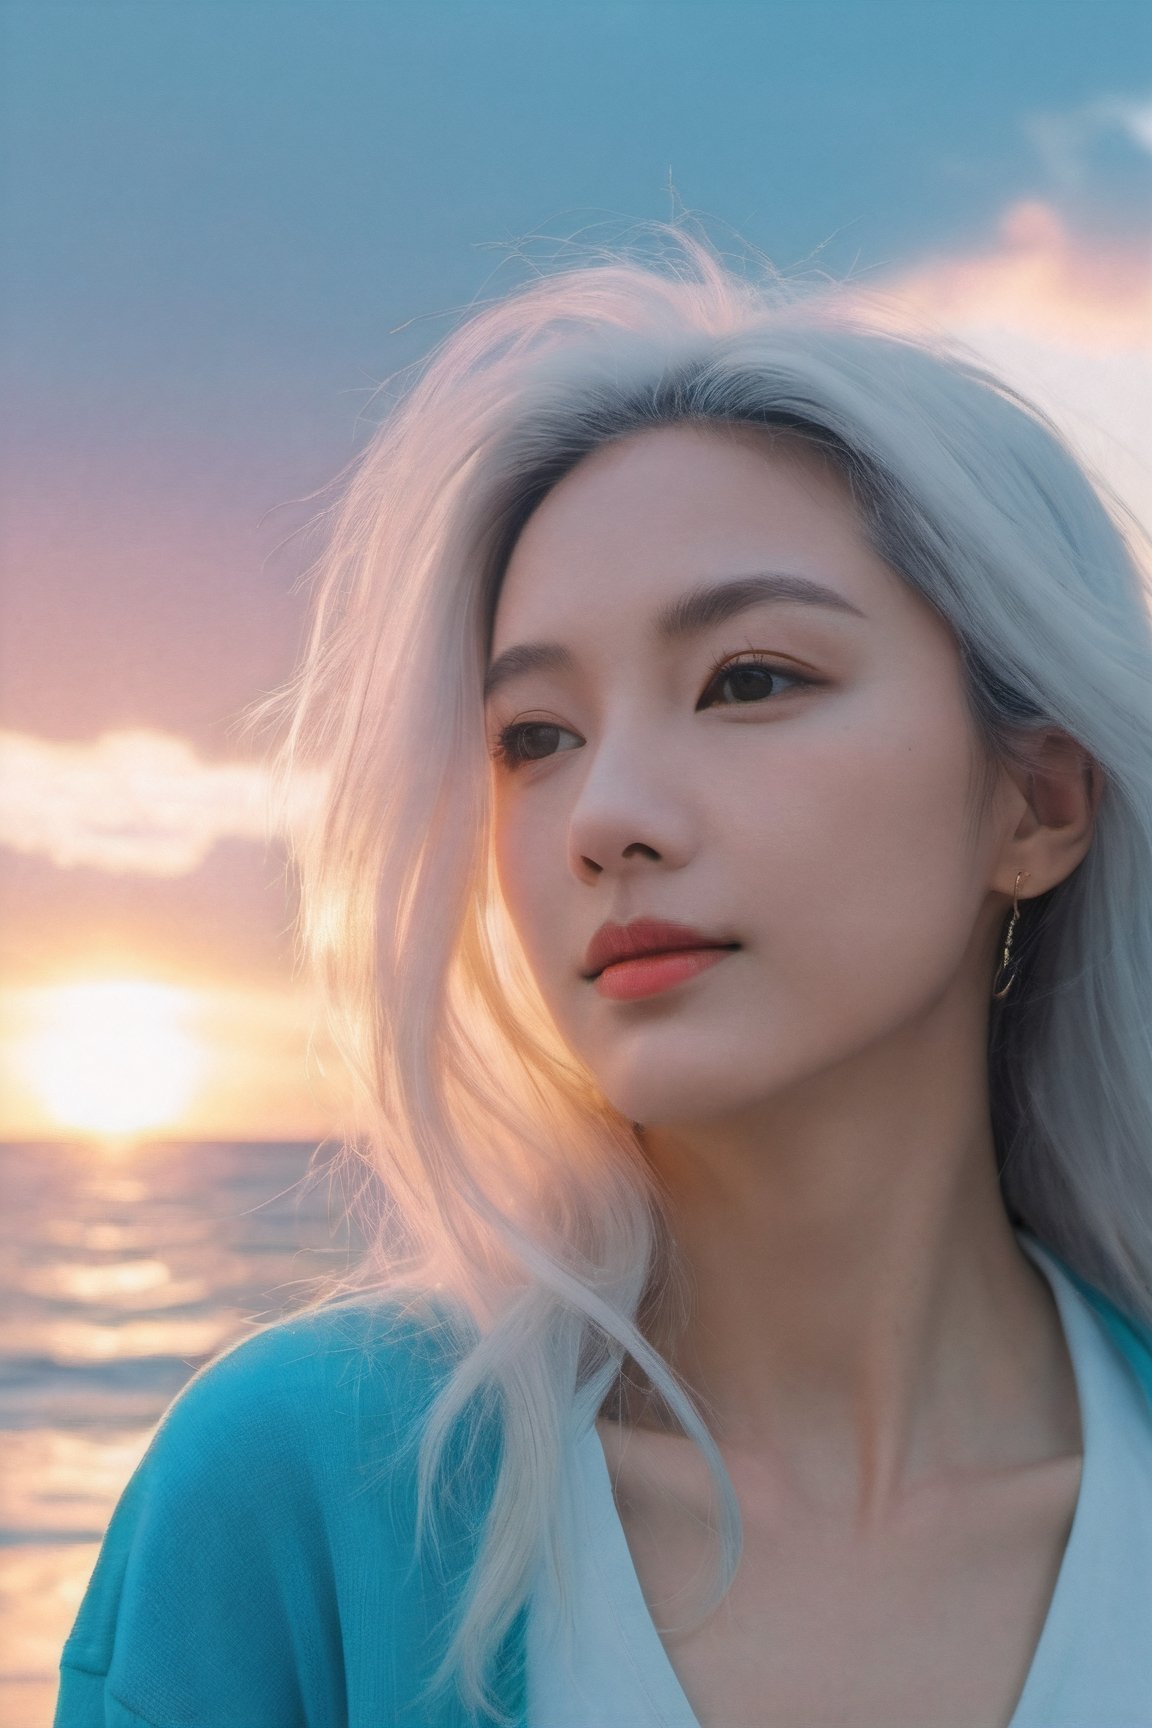 xxmixgirl, (masterpiece:1.0), (highest quality:1.12), (HDR:1.0), a girl with long wavy hair looking at viewer, (white hair), smile, with a teal background and sunshine sky, constant, vaporwave colors, a character portrait, synchronization, detailed, realistic, 8k uhd, high quality
,himeno,Mechanical part,Leonardo Style,